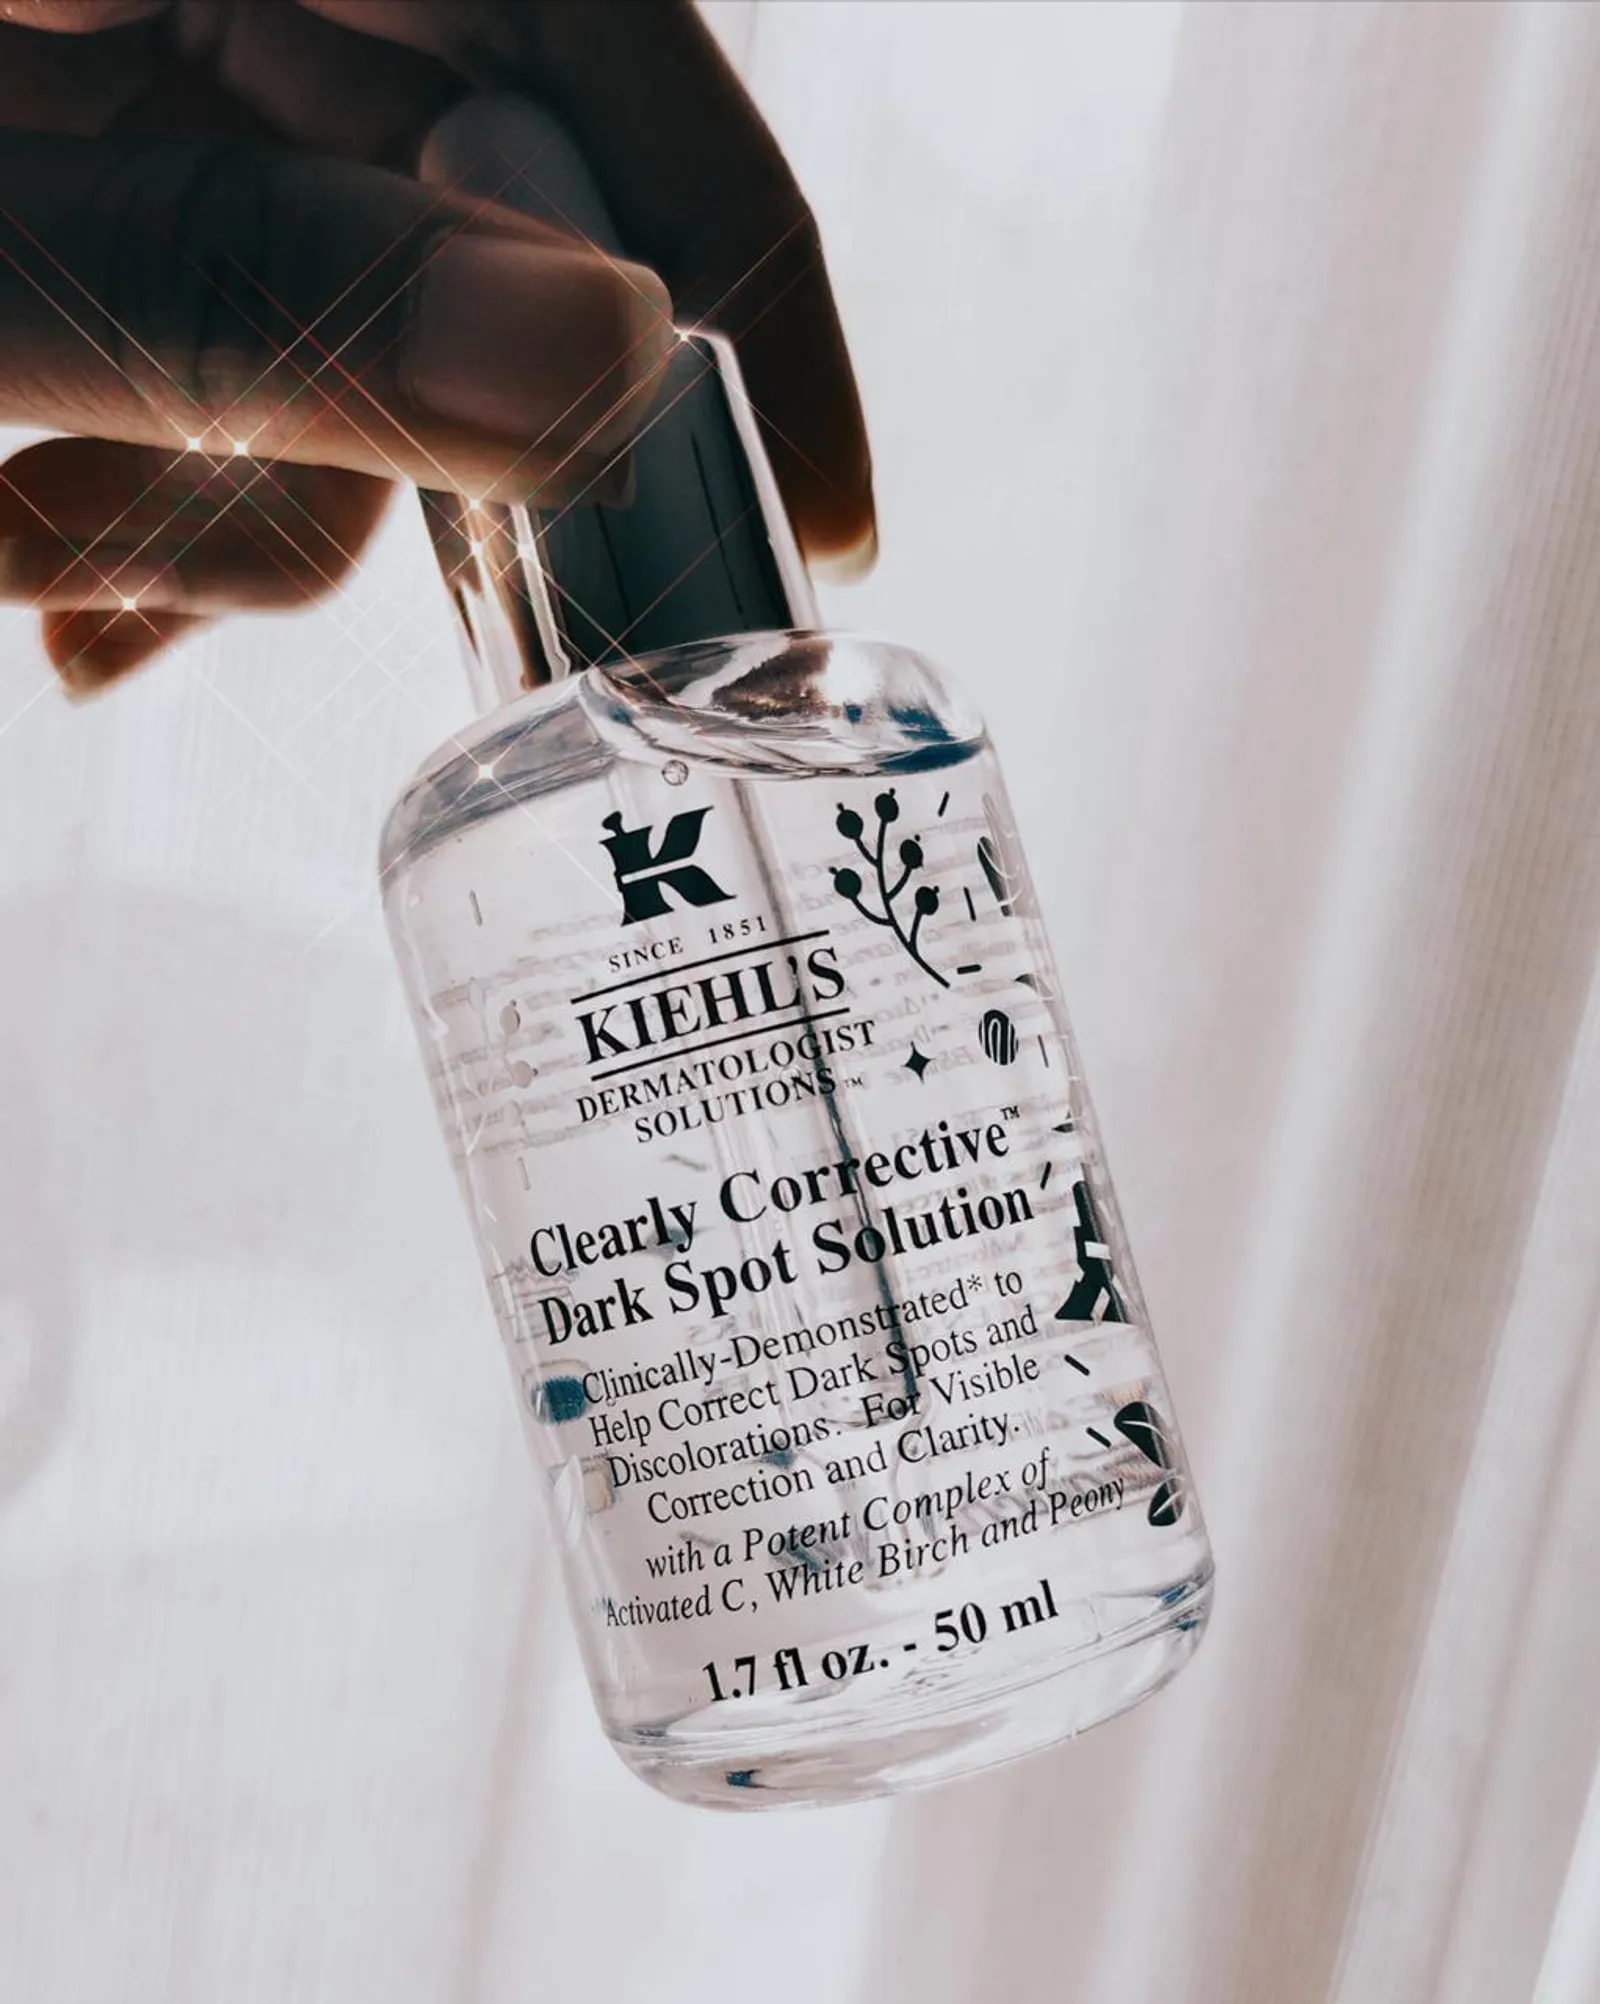 Review: Kiehl's Clearly Corrective Dark Spot Solution